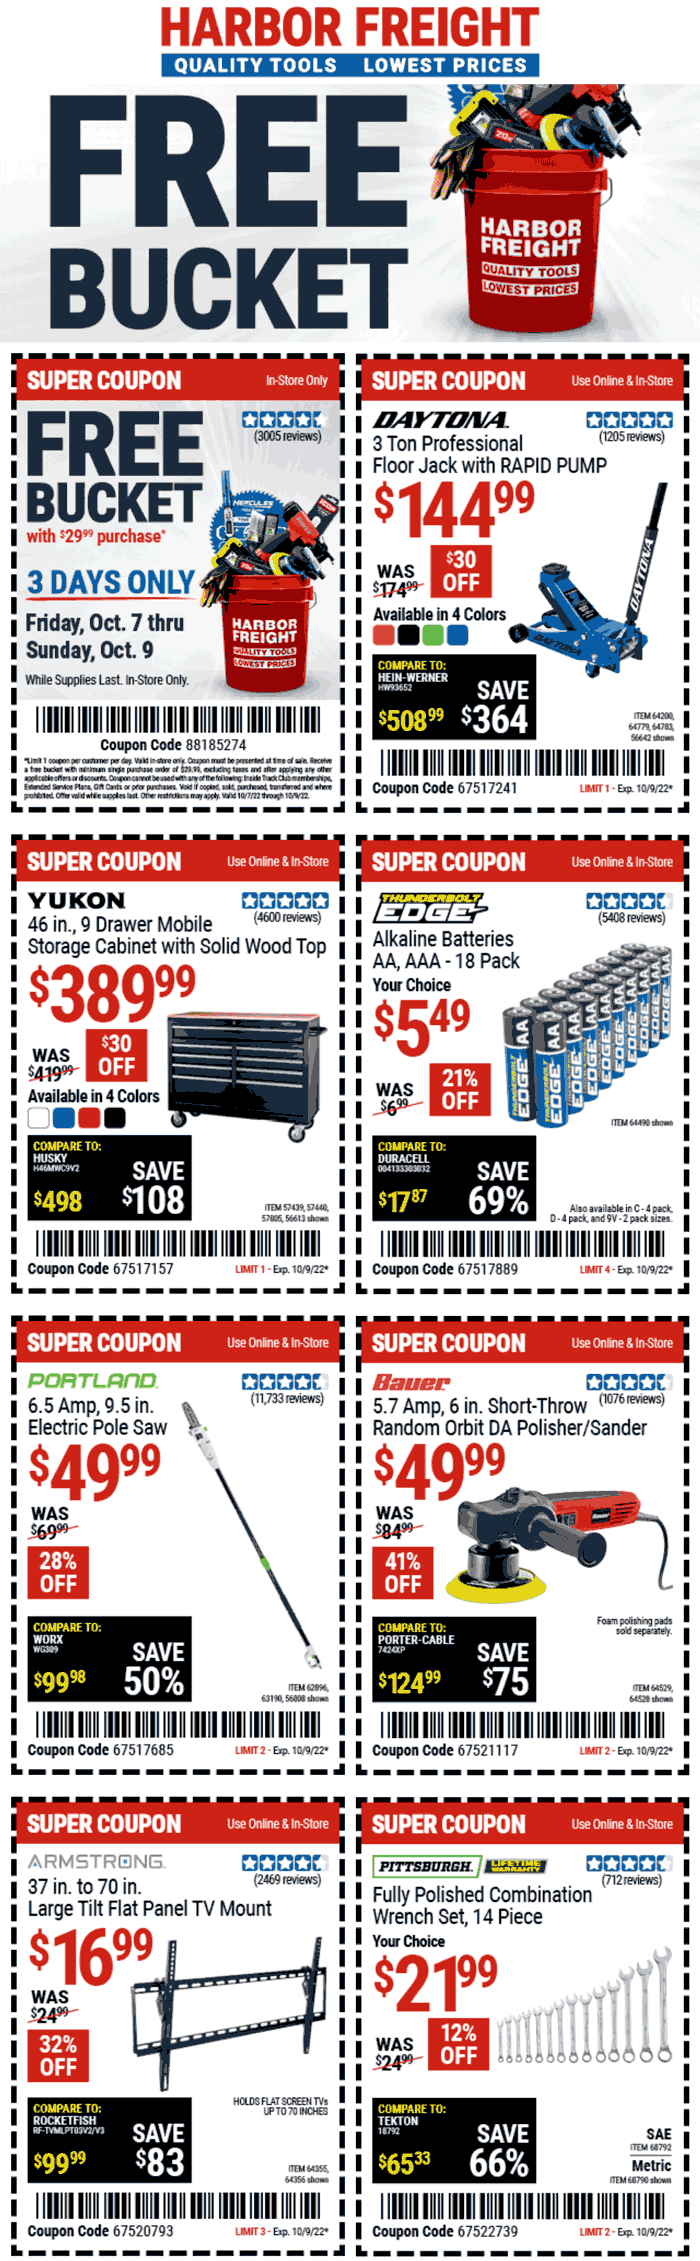 Harbor Freight stores Coupon  Free bucket on $30 spent & more at Harbor Freight Tools #harborfreight 